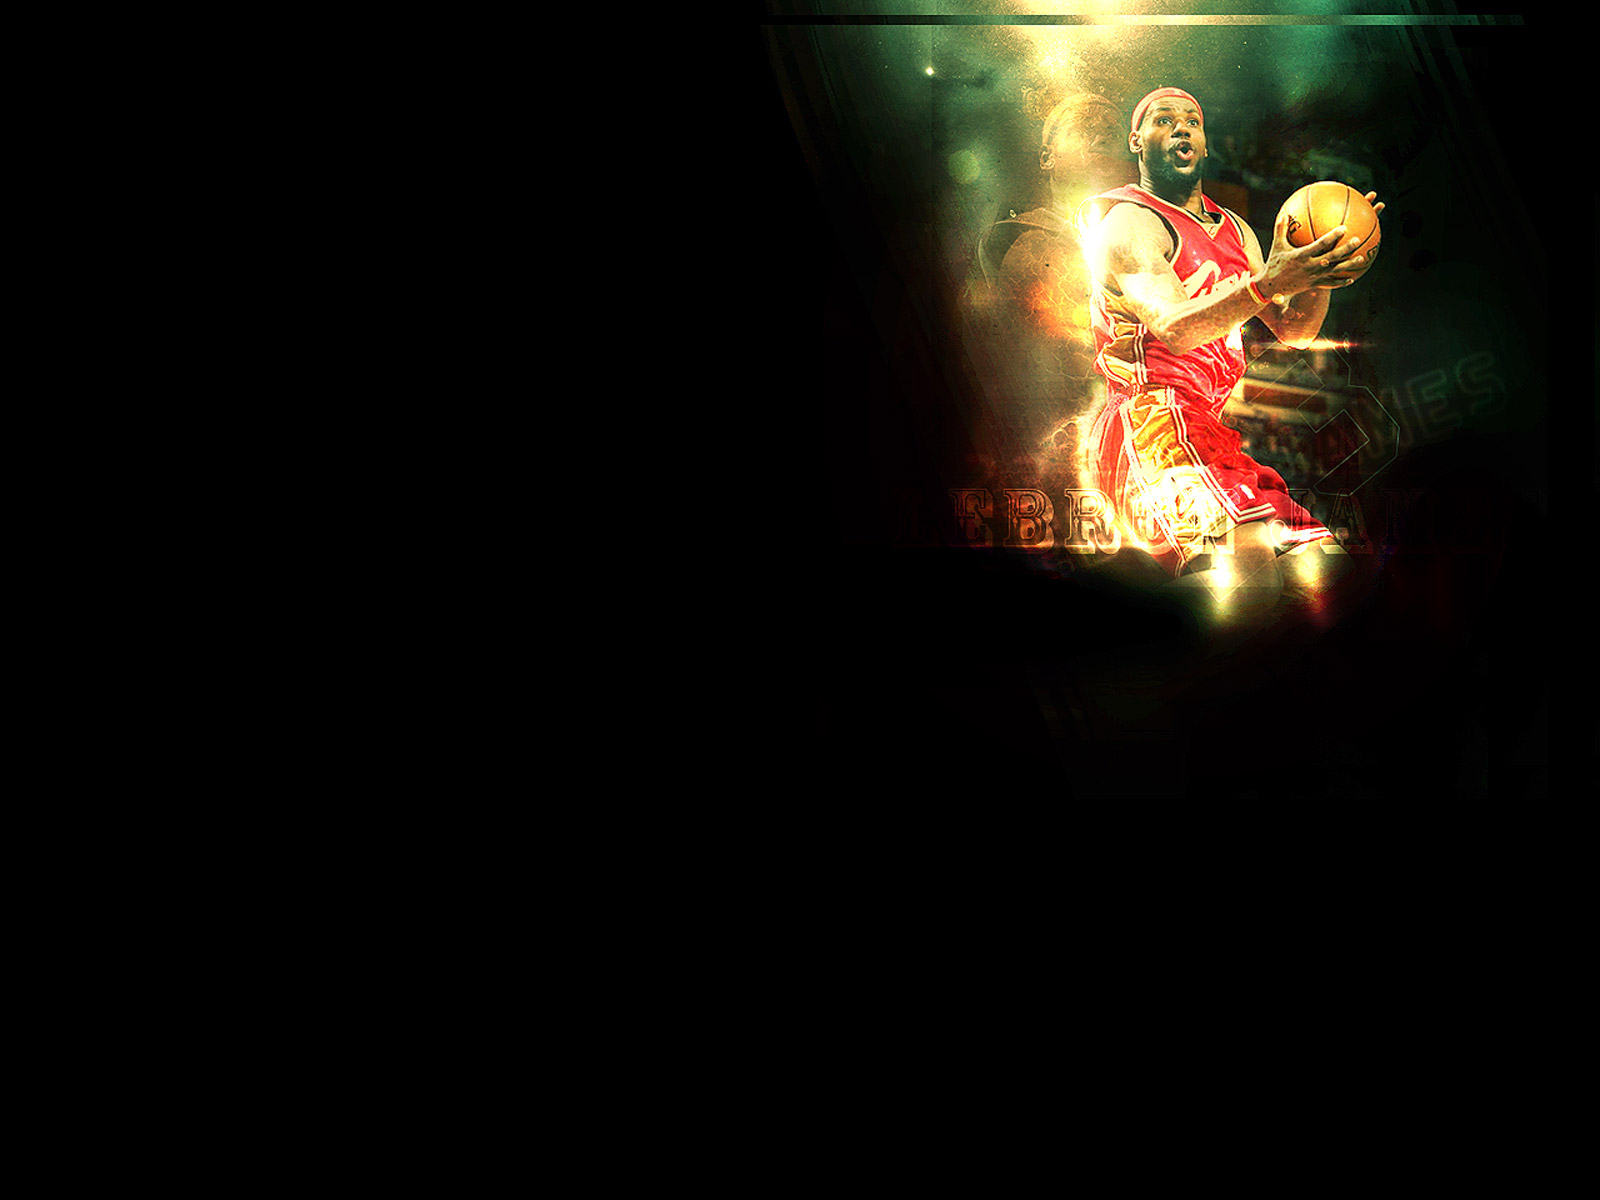  black background Size: 1600x1200, Posted in: USA / NBA -> LeBron 